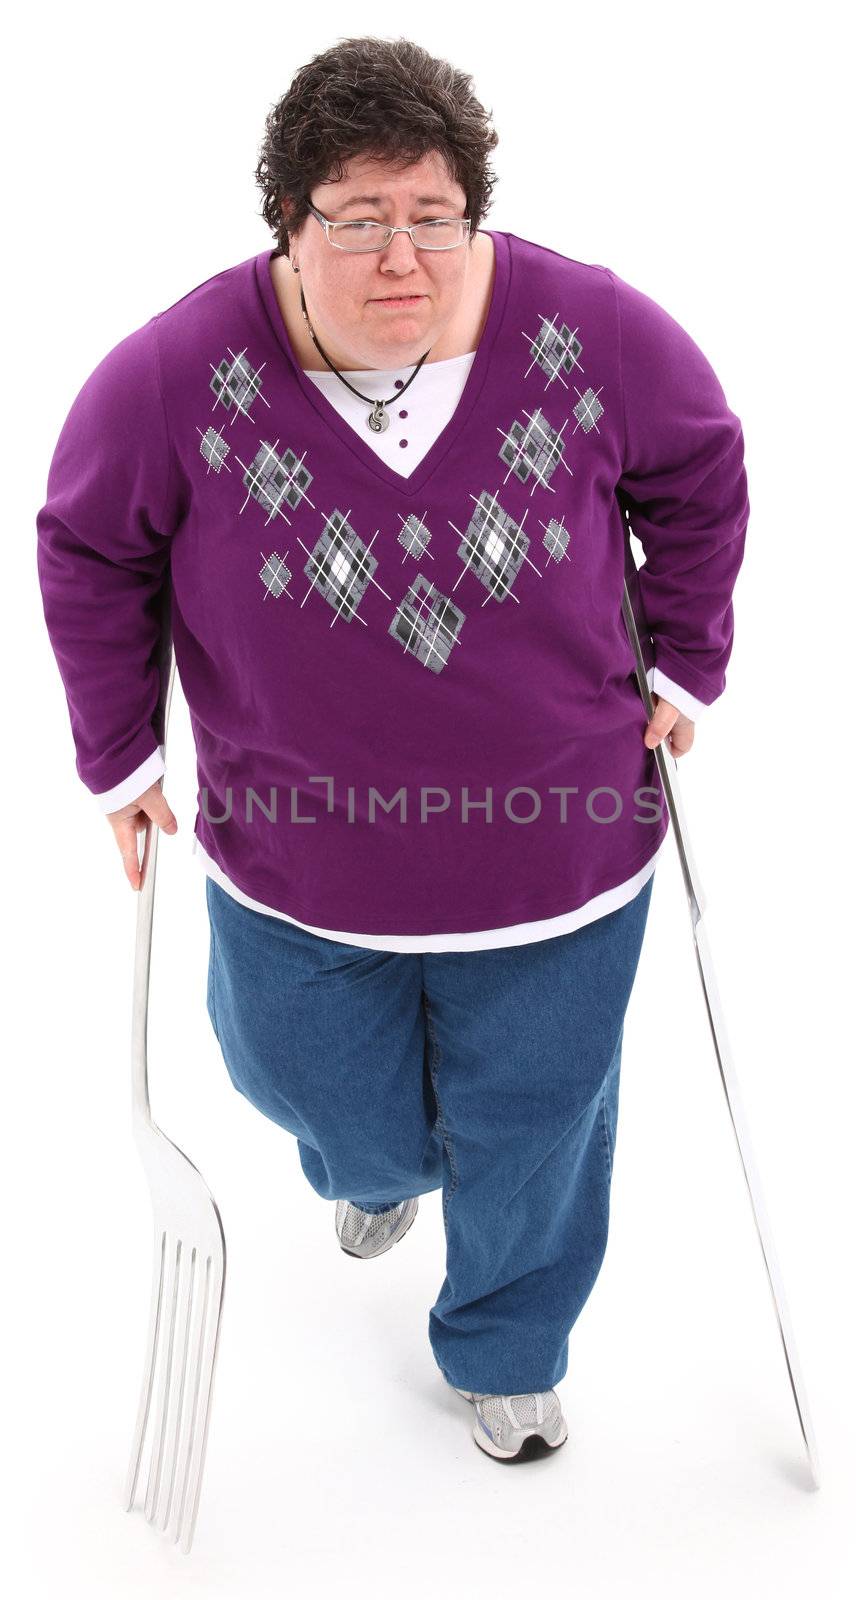 Food as Crutch Concept overweigth woman with giant knife and fork used as crutches.  Over white with clipping path.